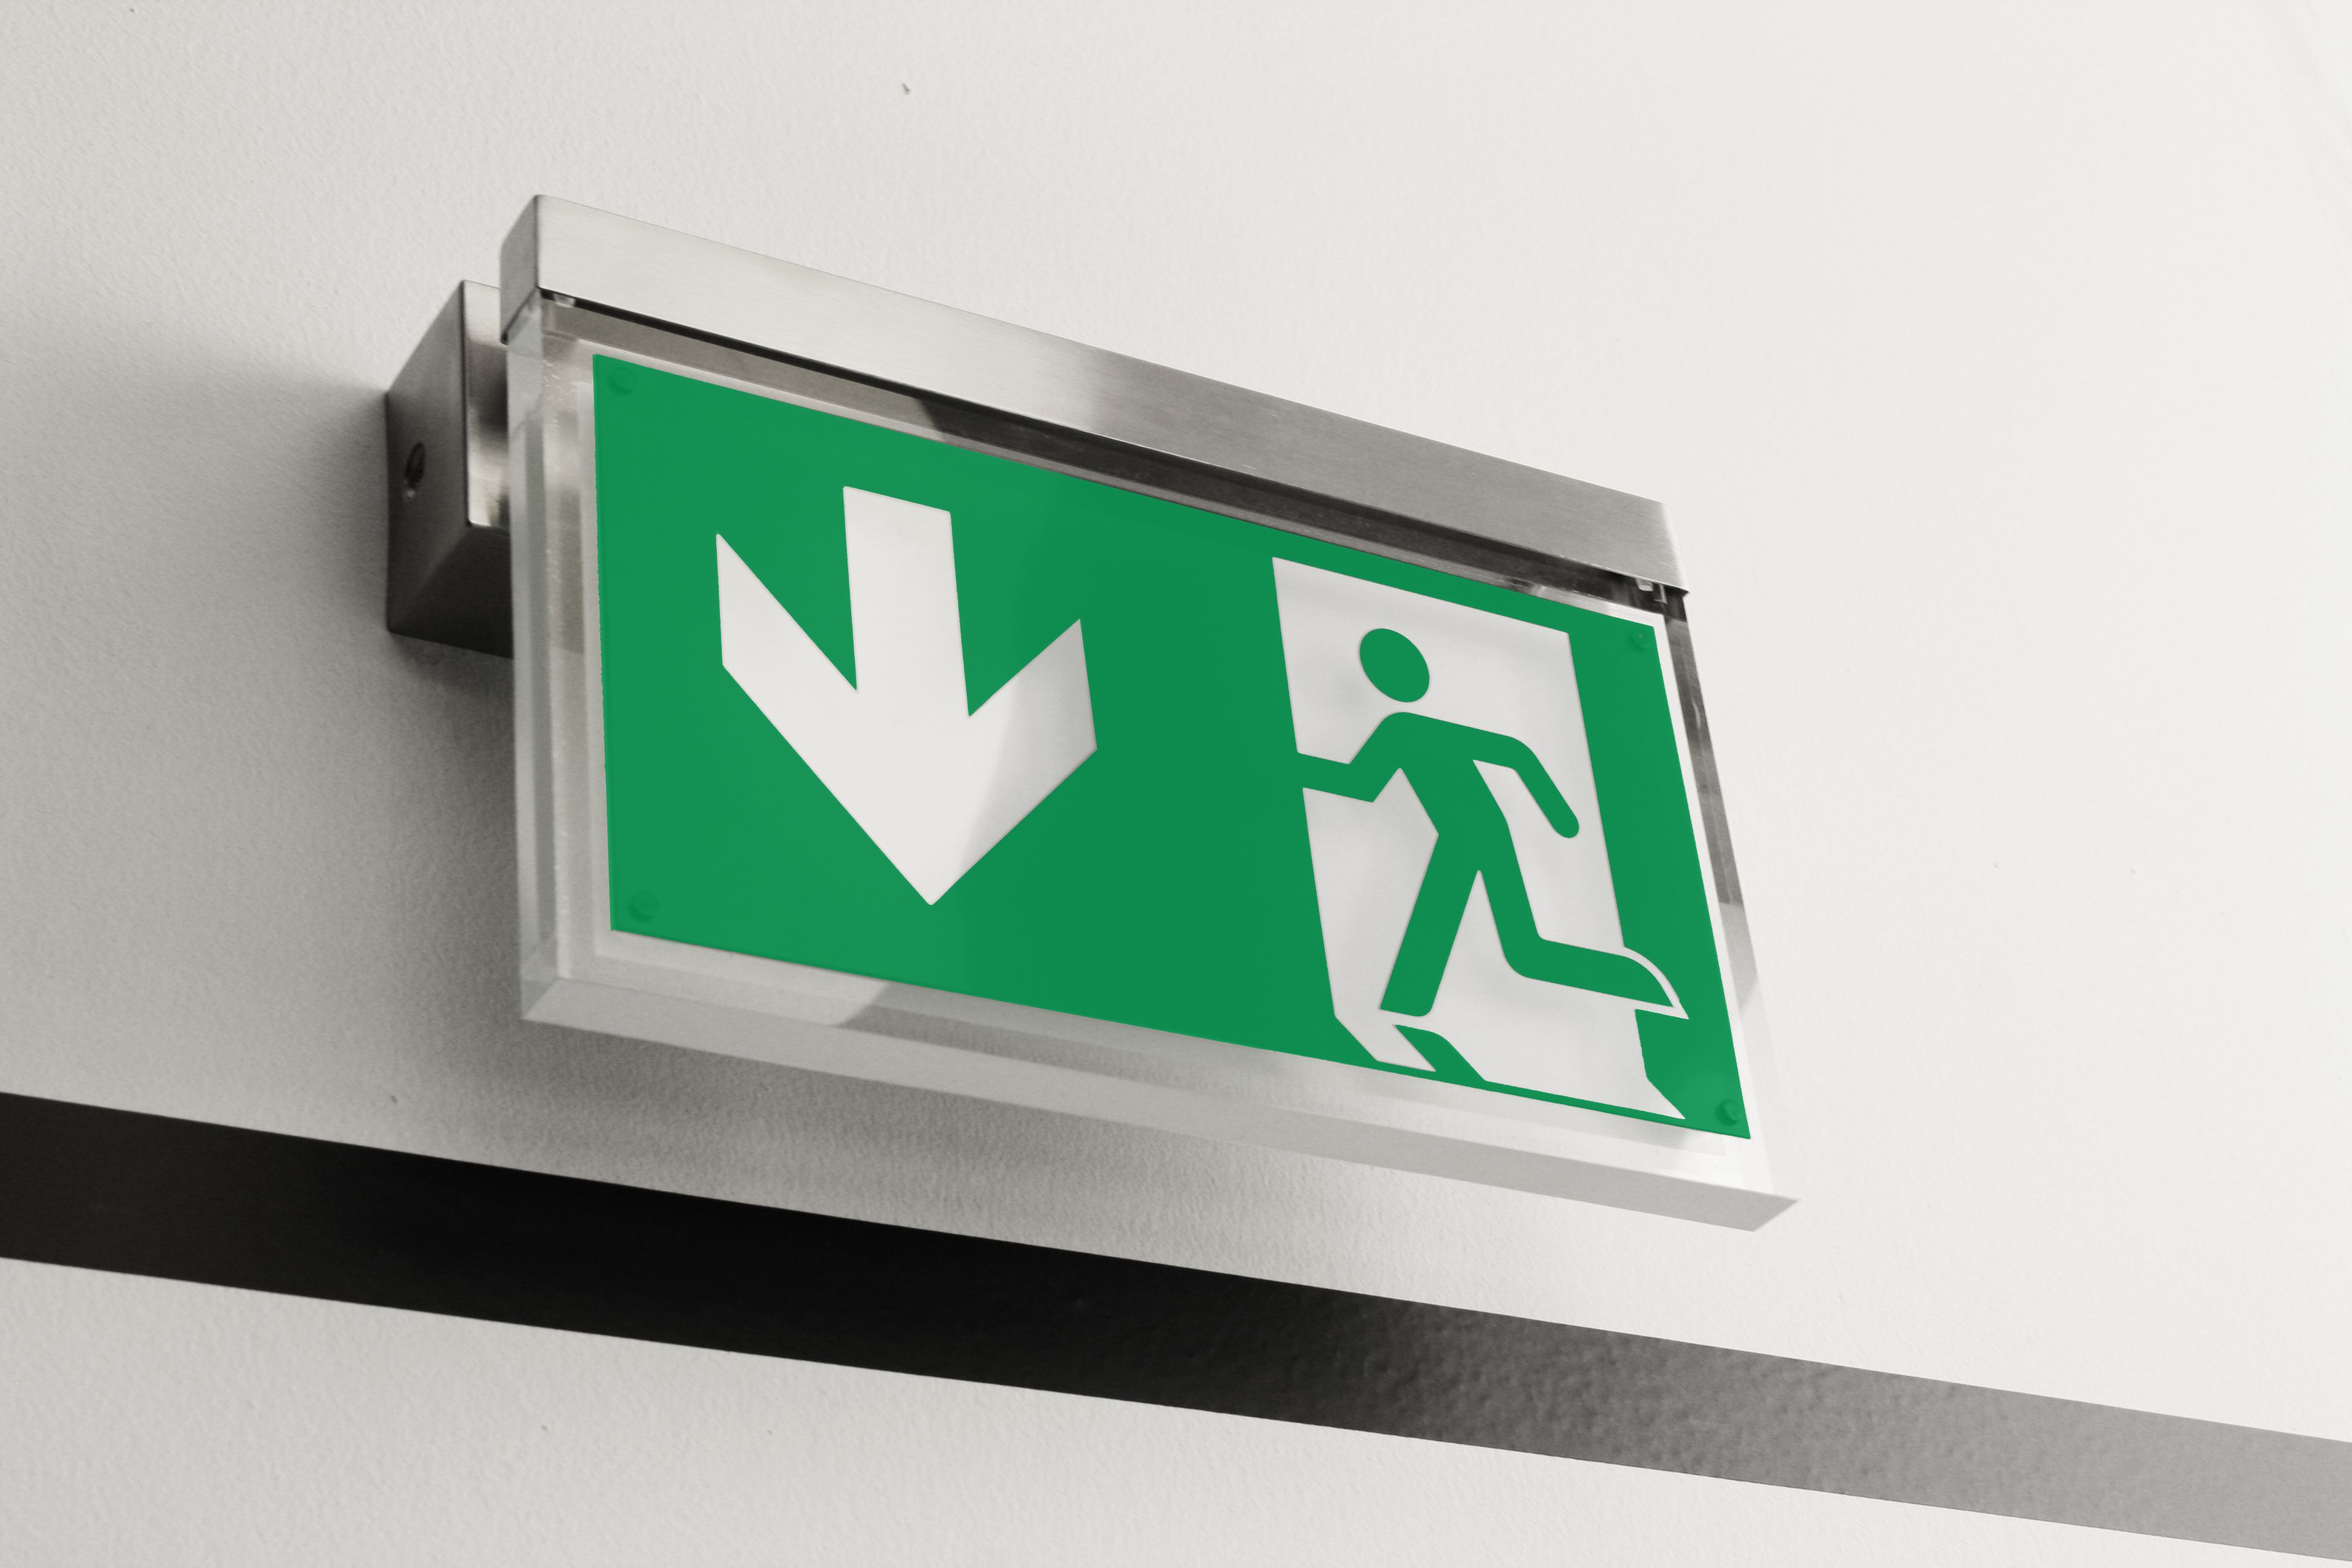 Stainless steel emergency exit lighting by Exii. Architectural ...